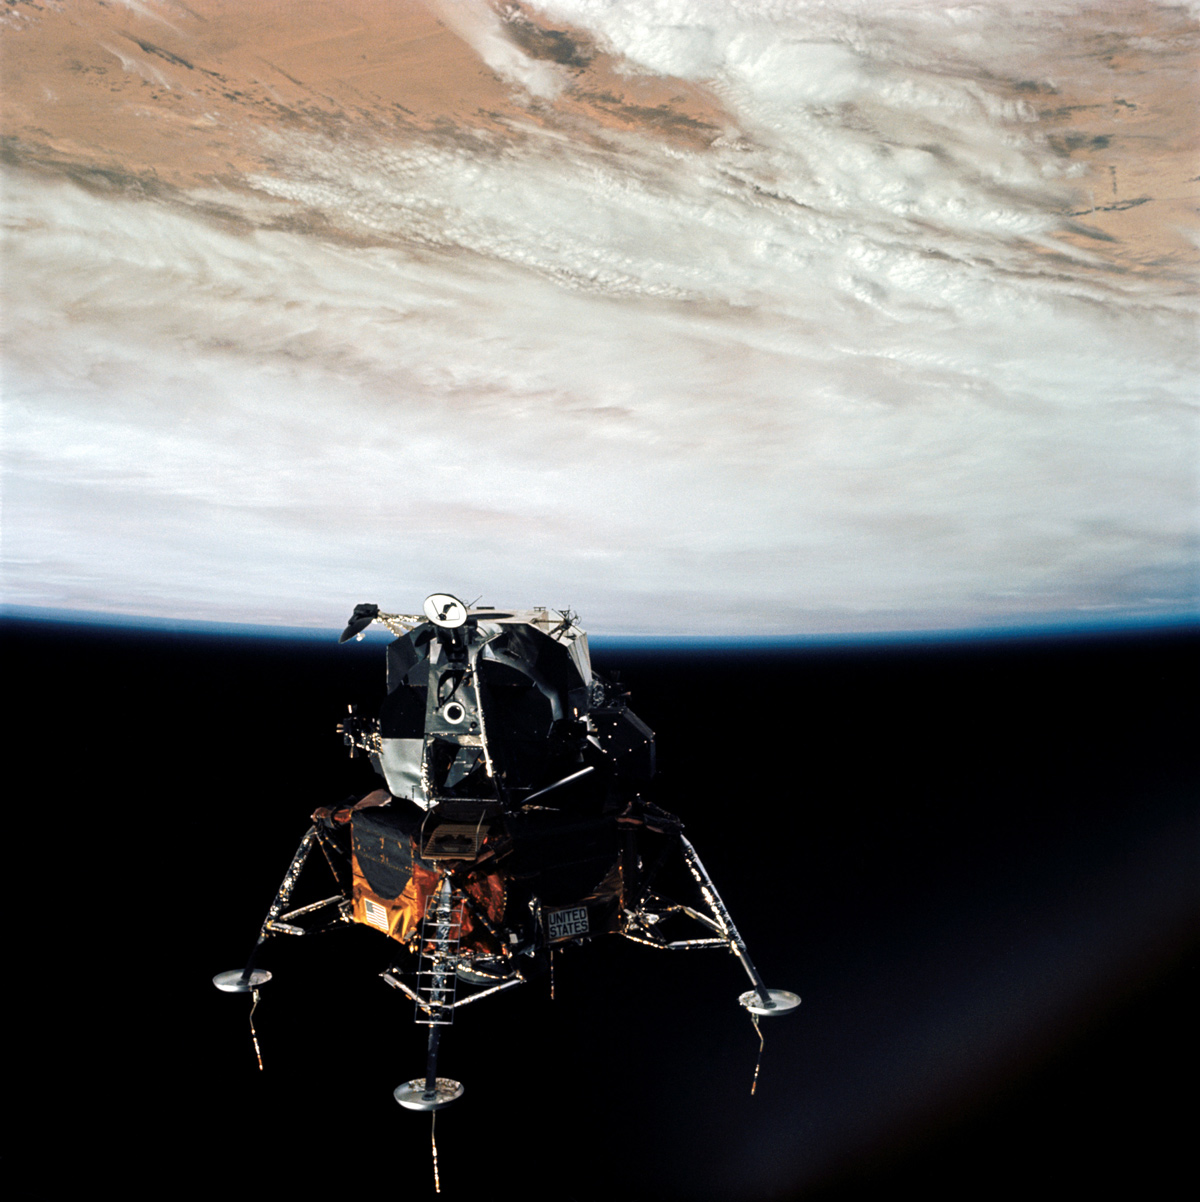 Apollo 9 Lunar Module in space with Earth in the background